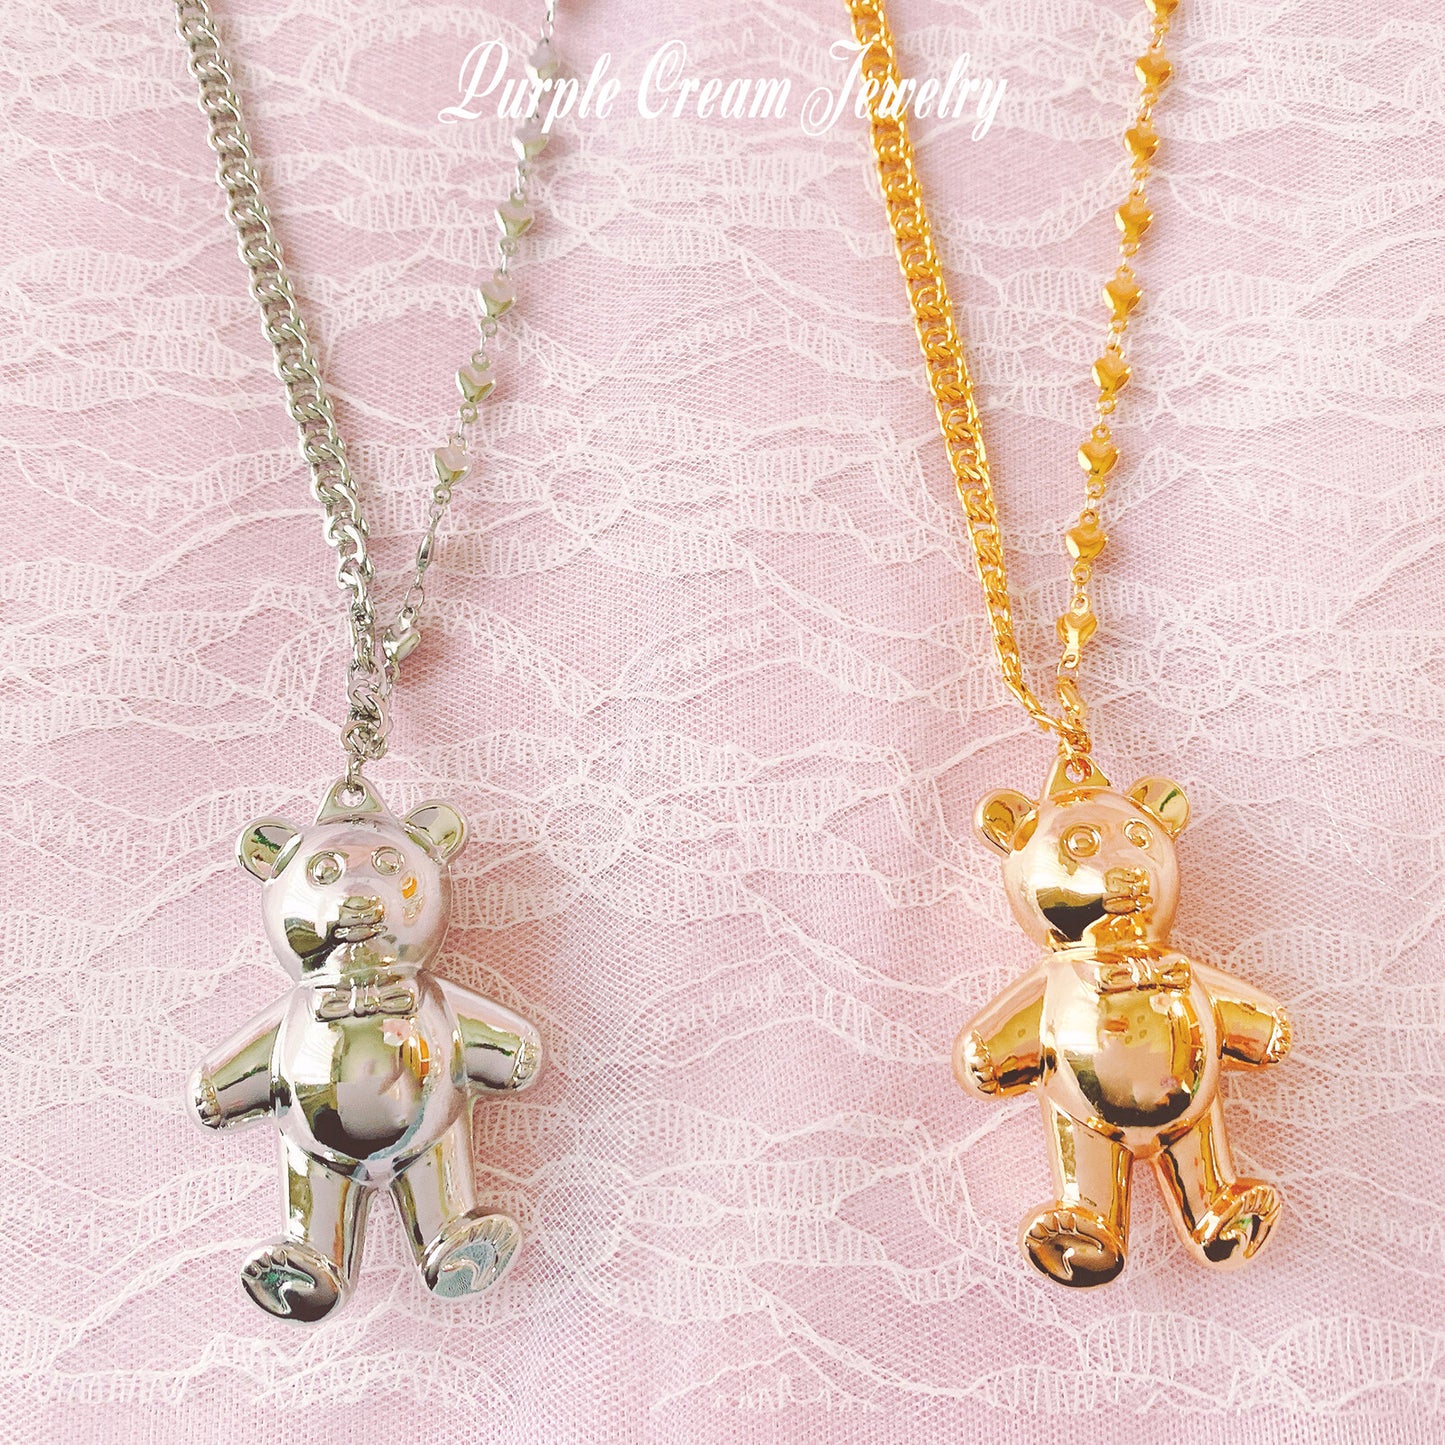 Purple Cream Big Teddy Bear Asymmetry Chain Necklace - YOUAREMYPOISON